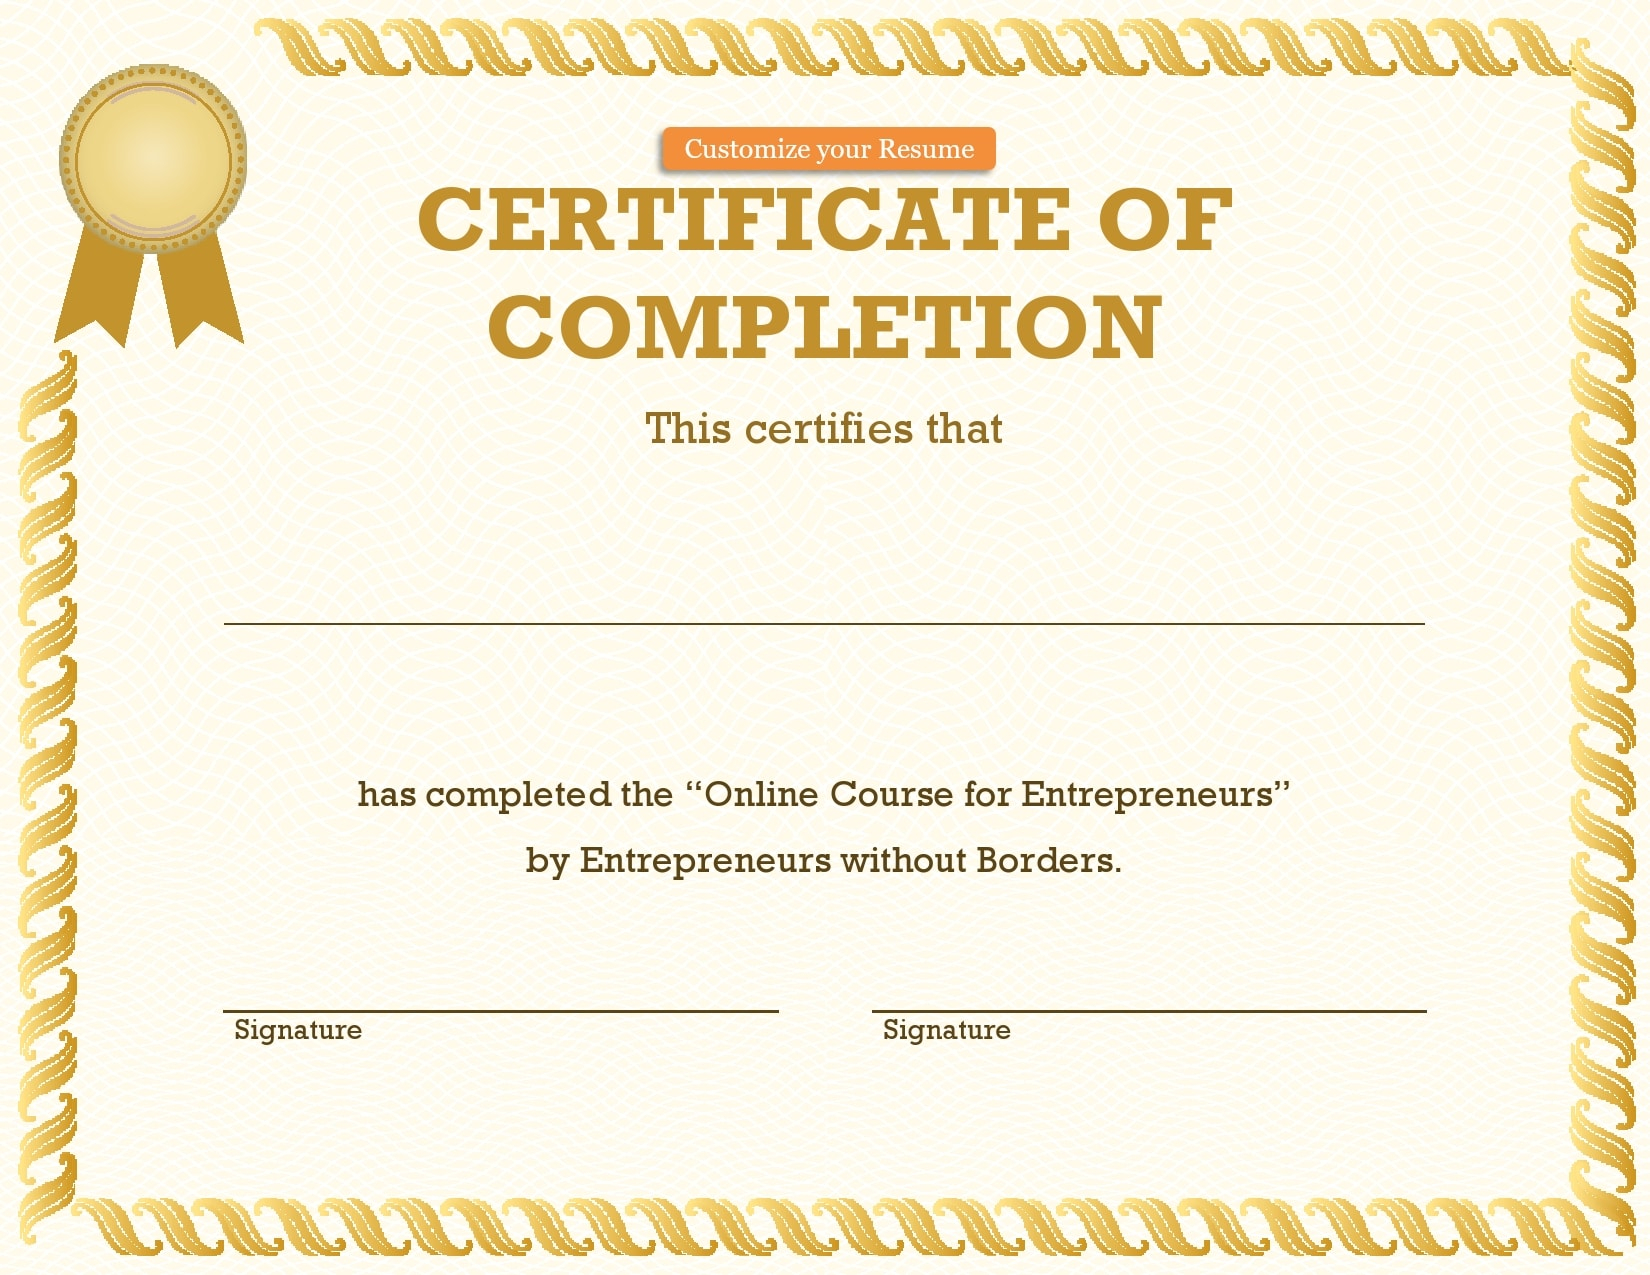 10 Great Certificate Of Completion Templates (10% FREE) Within Certificate Of Completion Template Word